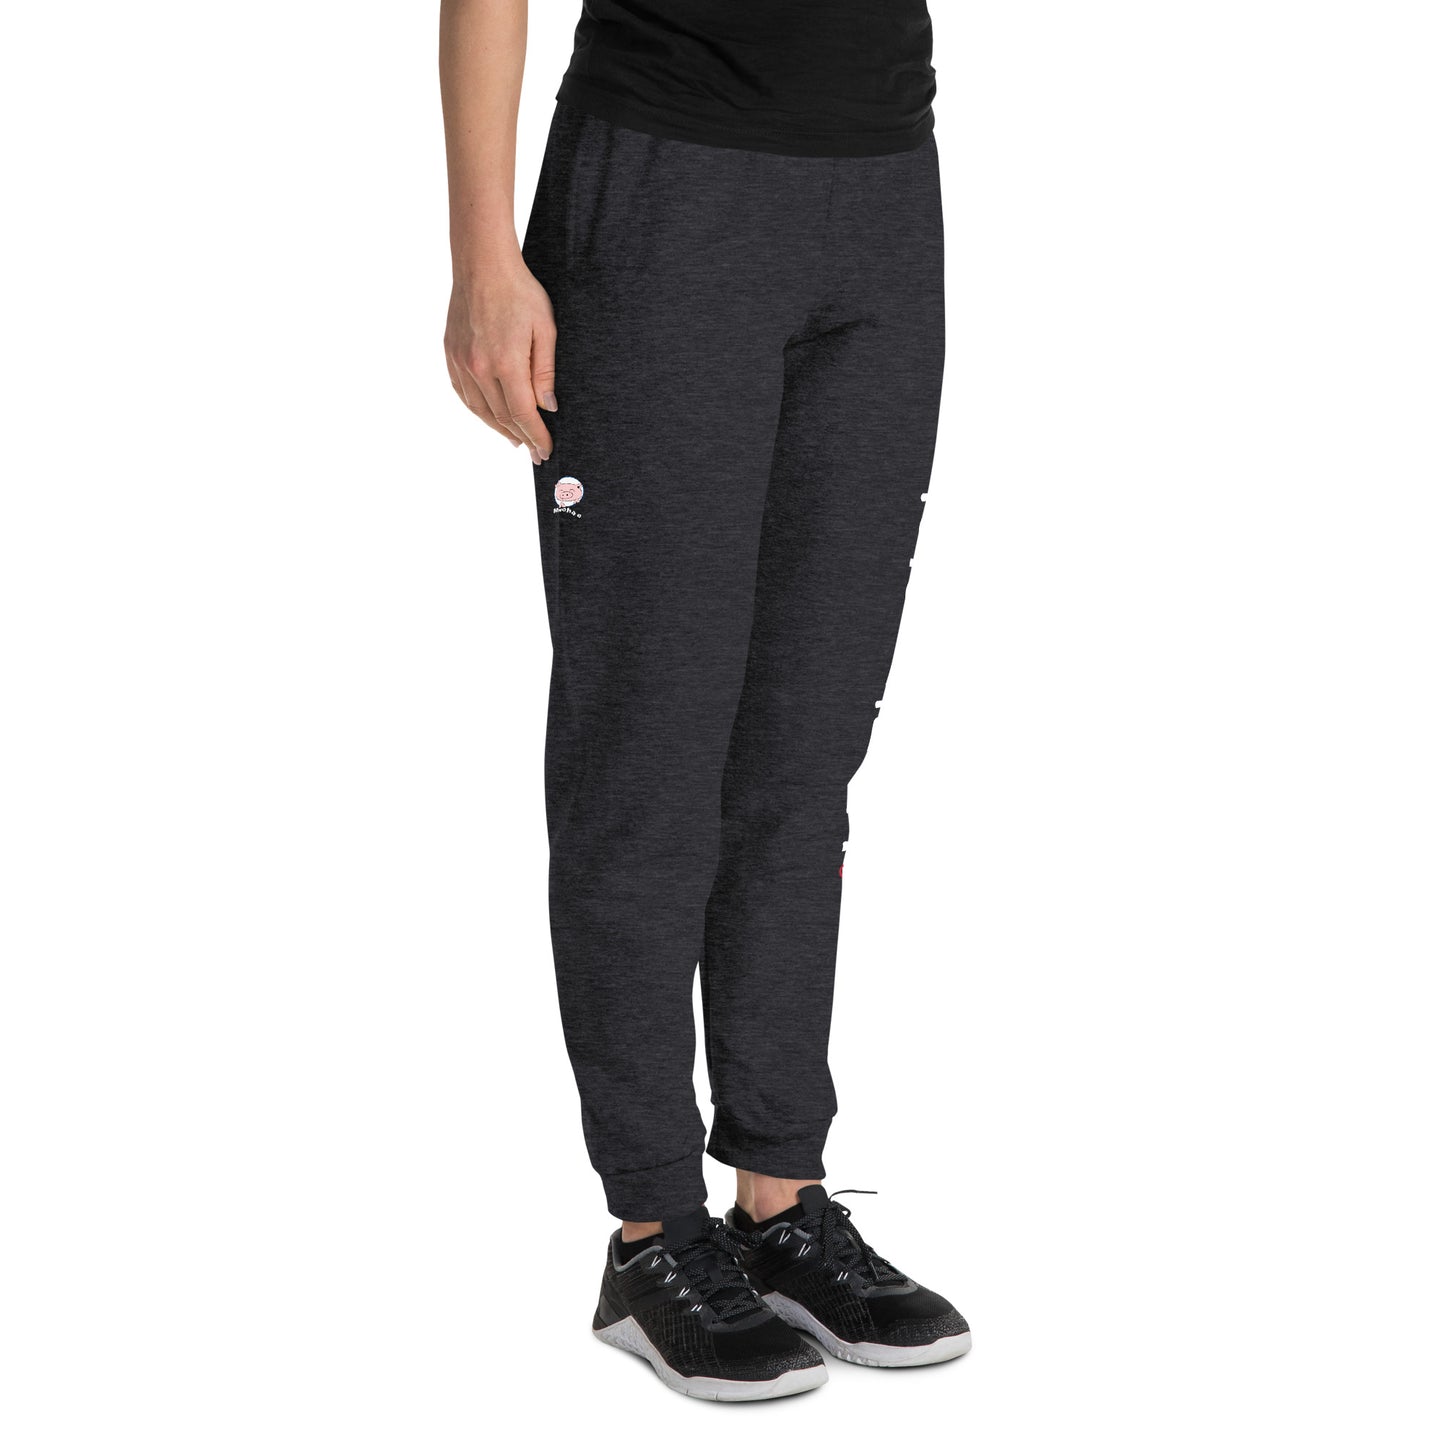 Heather black joggers with small Mwohae logo on the right leg